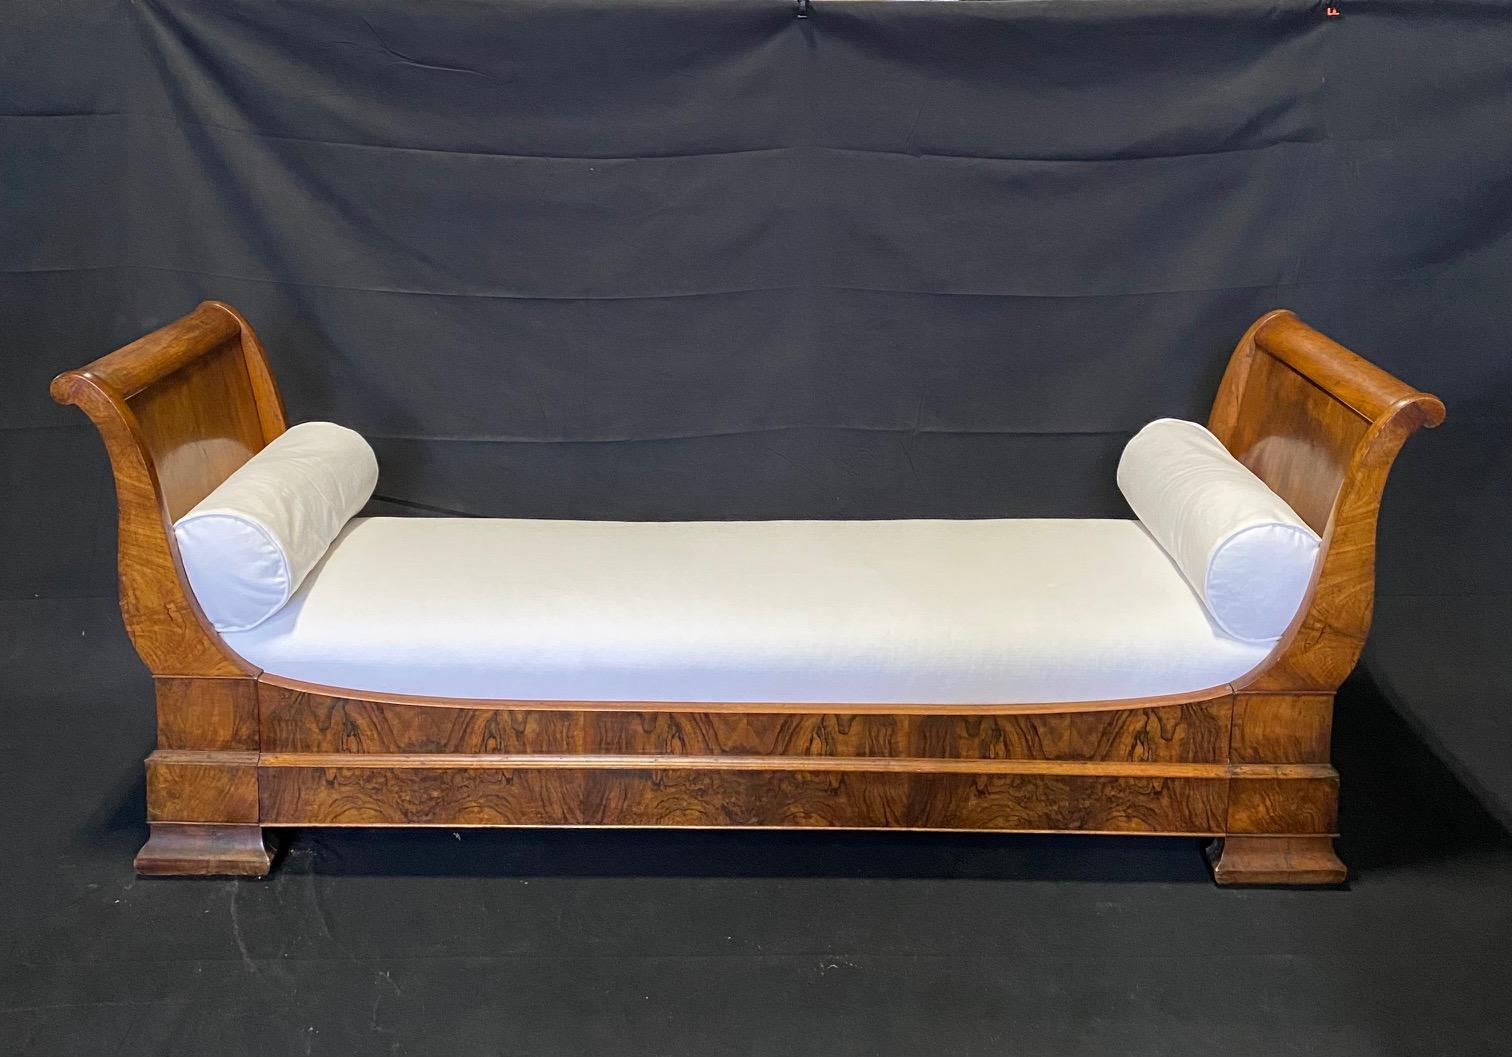 A Louis Philippe style beautifully burled walnut daybed. Mid-19th century, France. Newly upholstered and reconditioned. #5624.